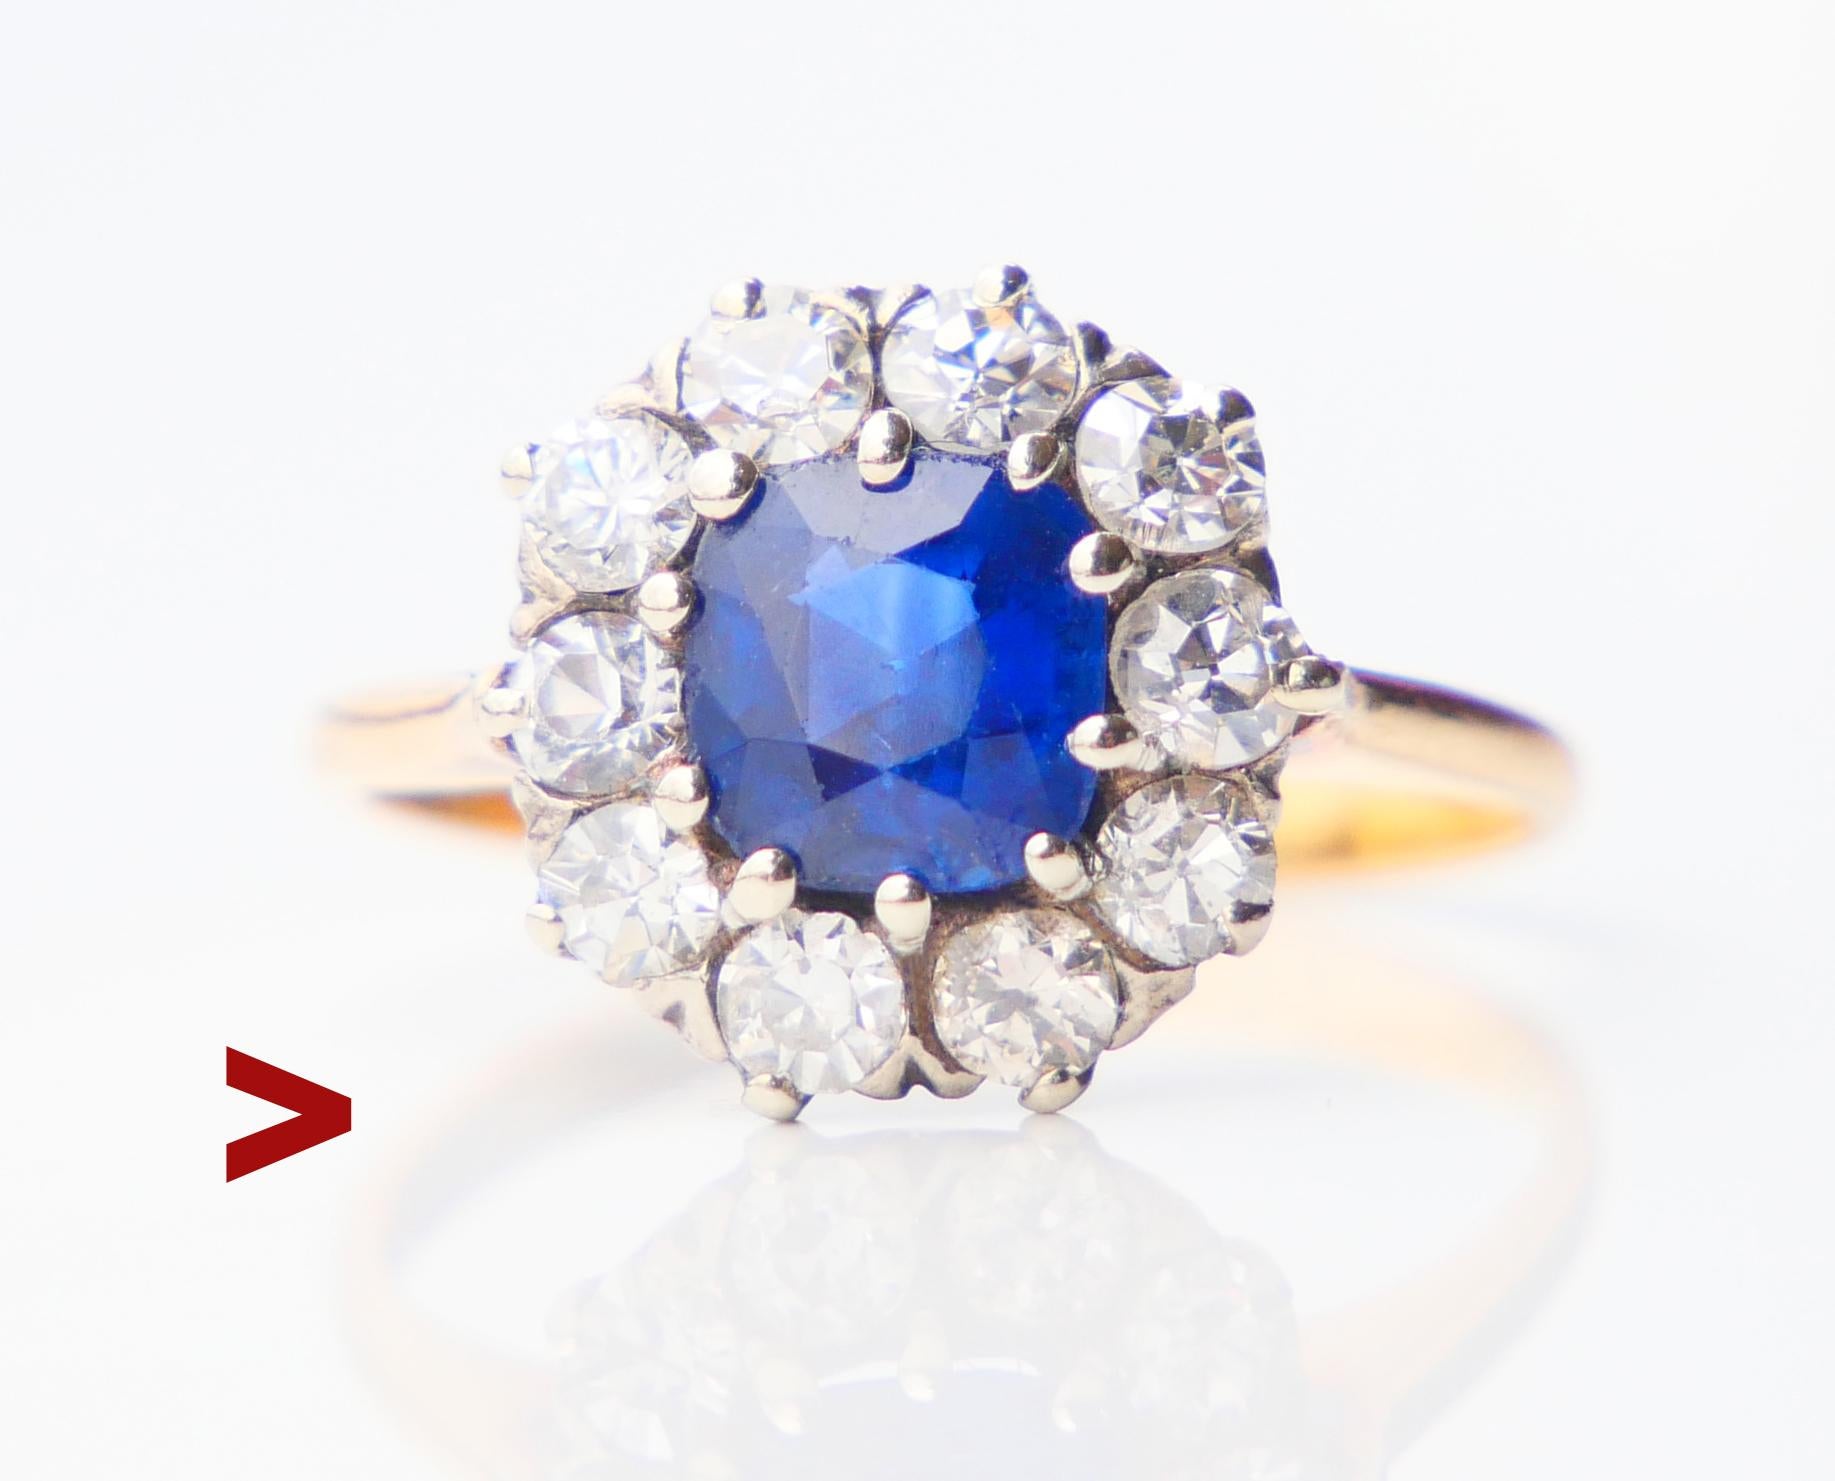 Beautiful Halo Ring in solid 18K Yellow Gold with natural Blue Sapphire and 10 Diamonds in White Gold / or Platinum settings.

Natural Sapphire of old European cushion cut, color is medium Blue, demonstrates inclusions and distinctive Color